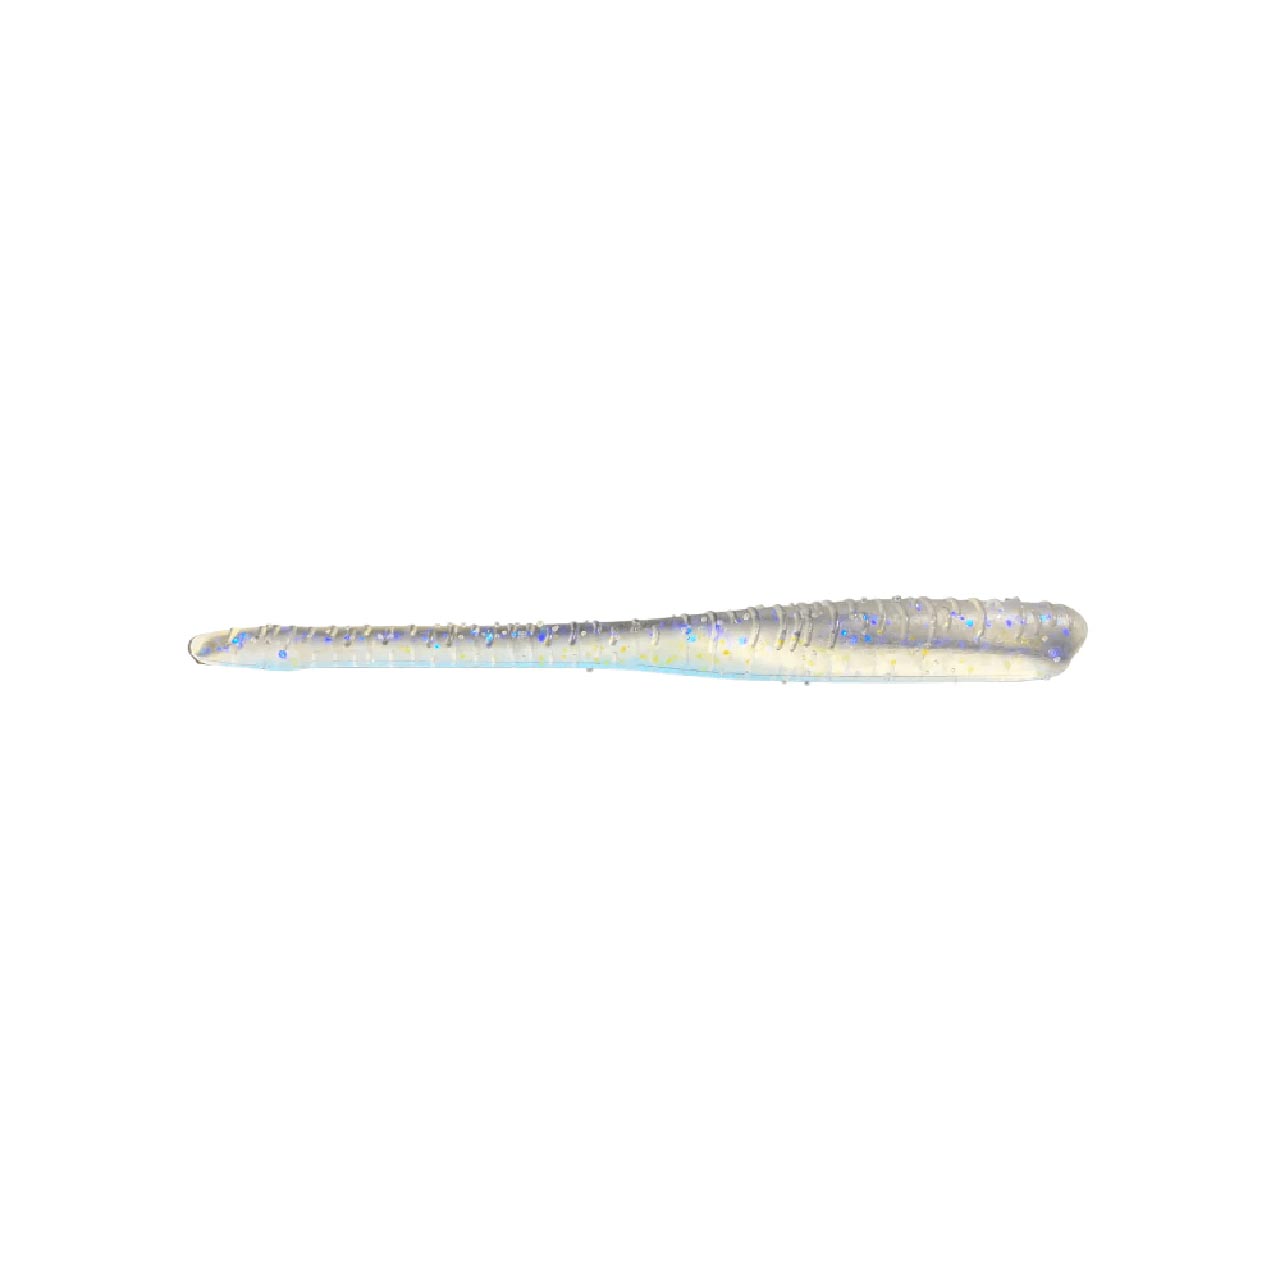 Great Lakes Finesse Drop Worm - 4in - Iridescent